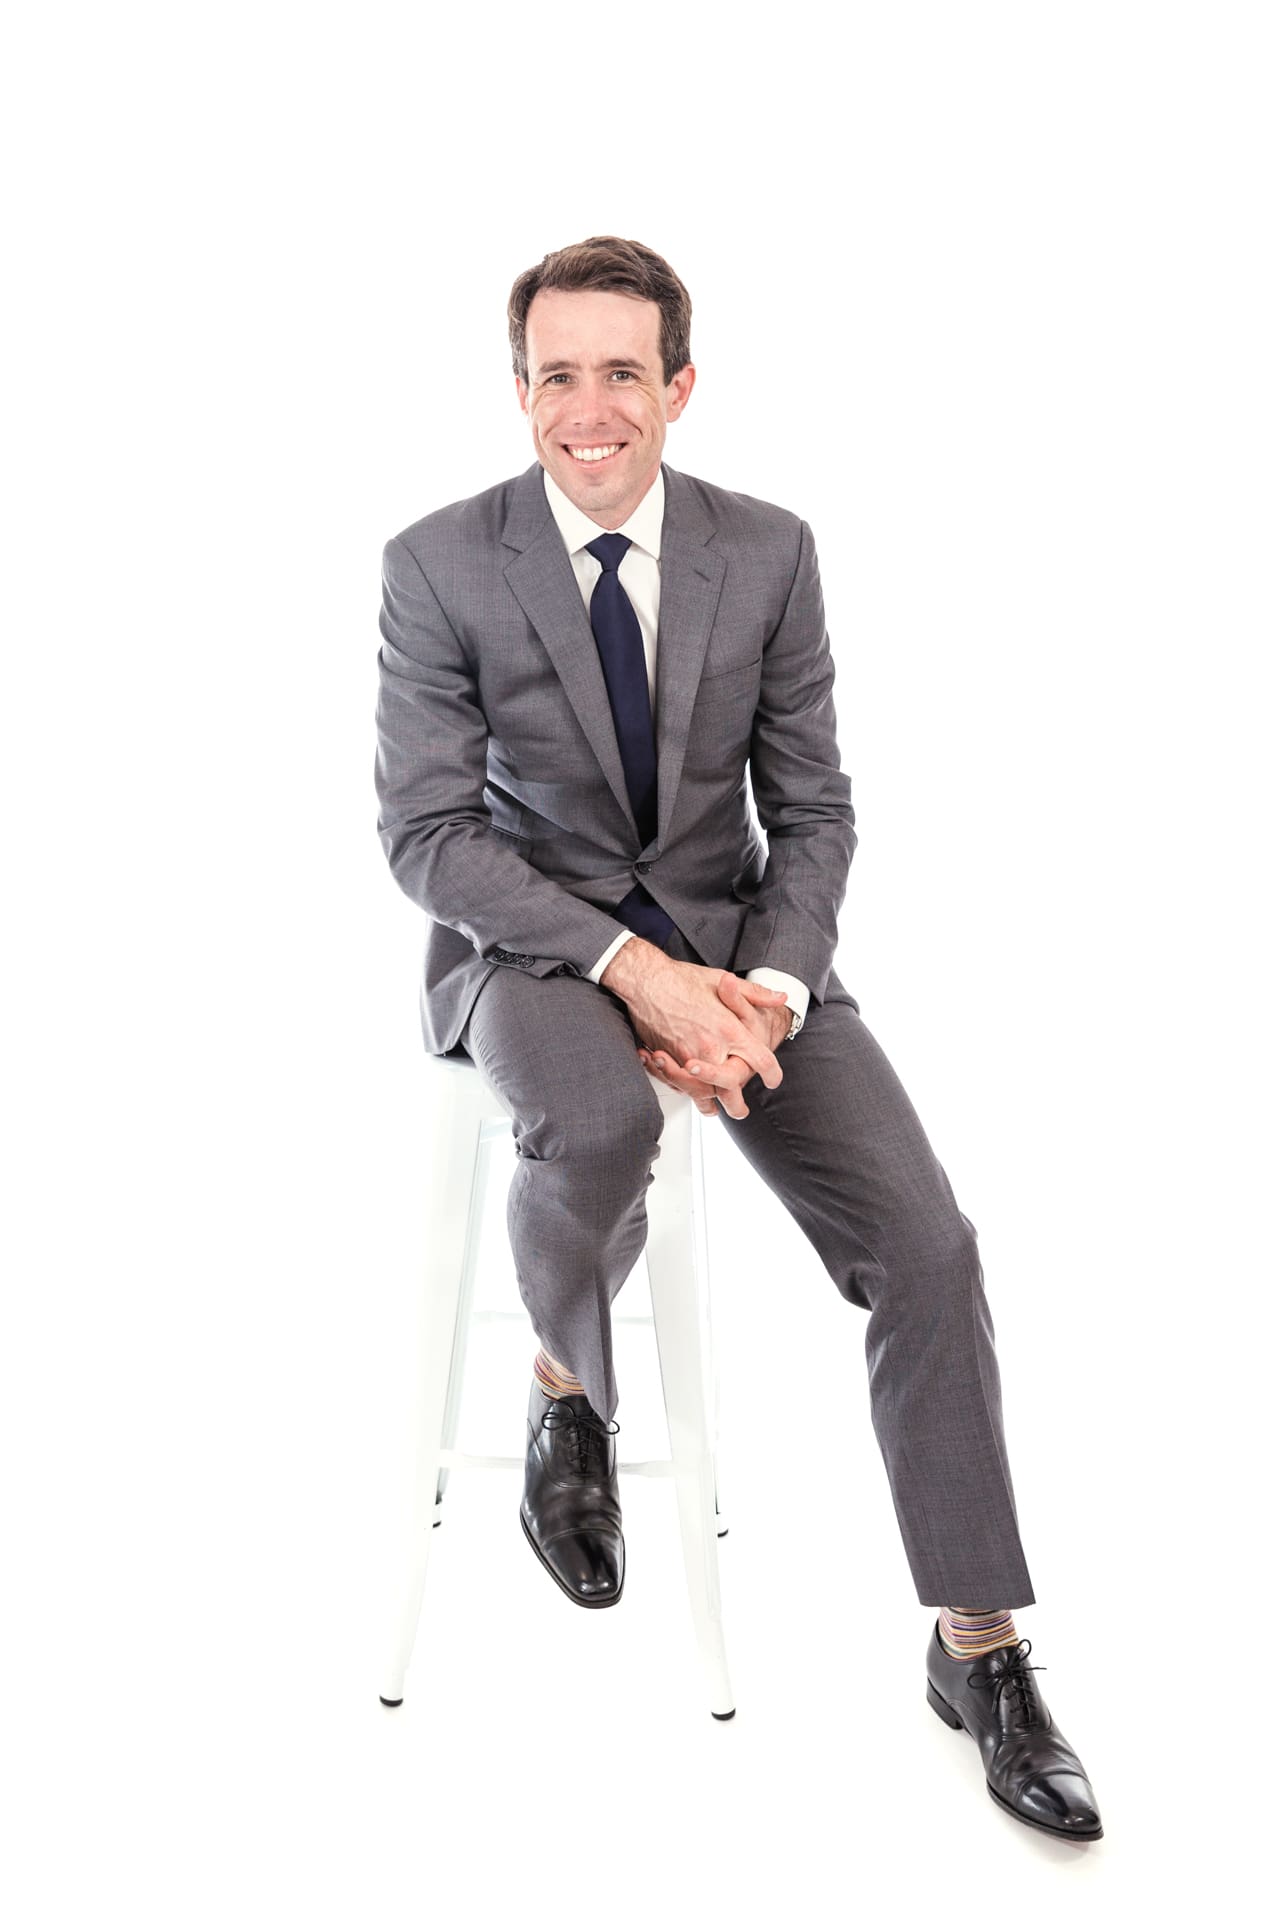 Studio portrait of man in gray suit and blue tie sitting on stool with white backdrop at Chicago photography studio P&M Studio